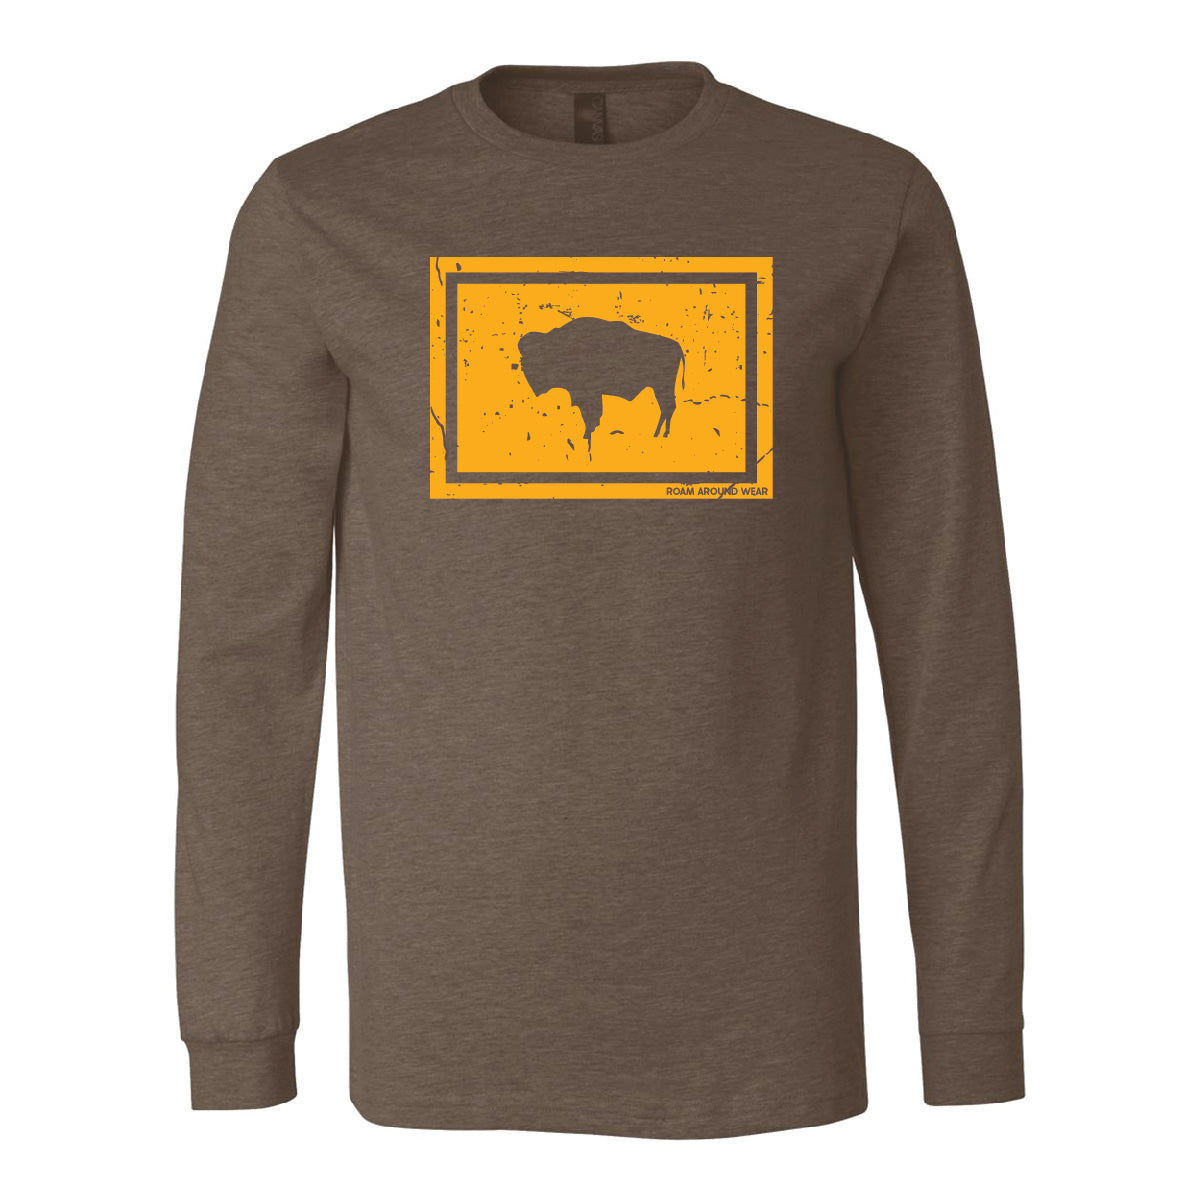 Long sleeve bison t-shirt. Wyoming long sleeve tee. Wyoming t-shirt. Roam Around Wear is a Wyoming t-shirt company based out of Gillette, Wyoming